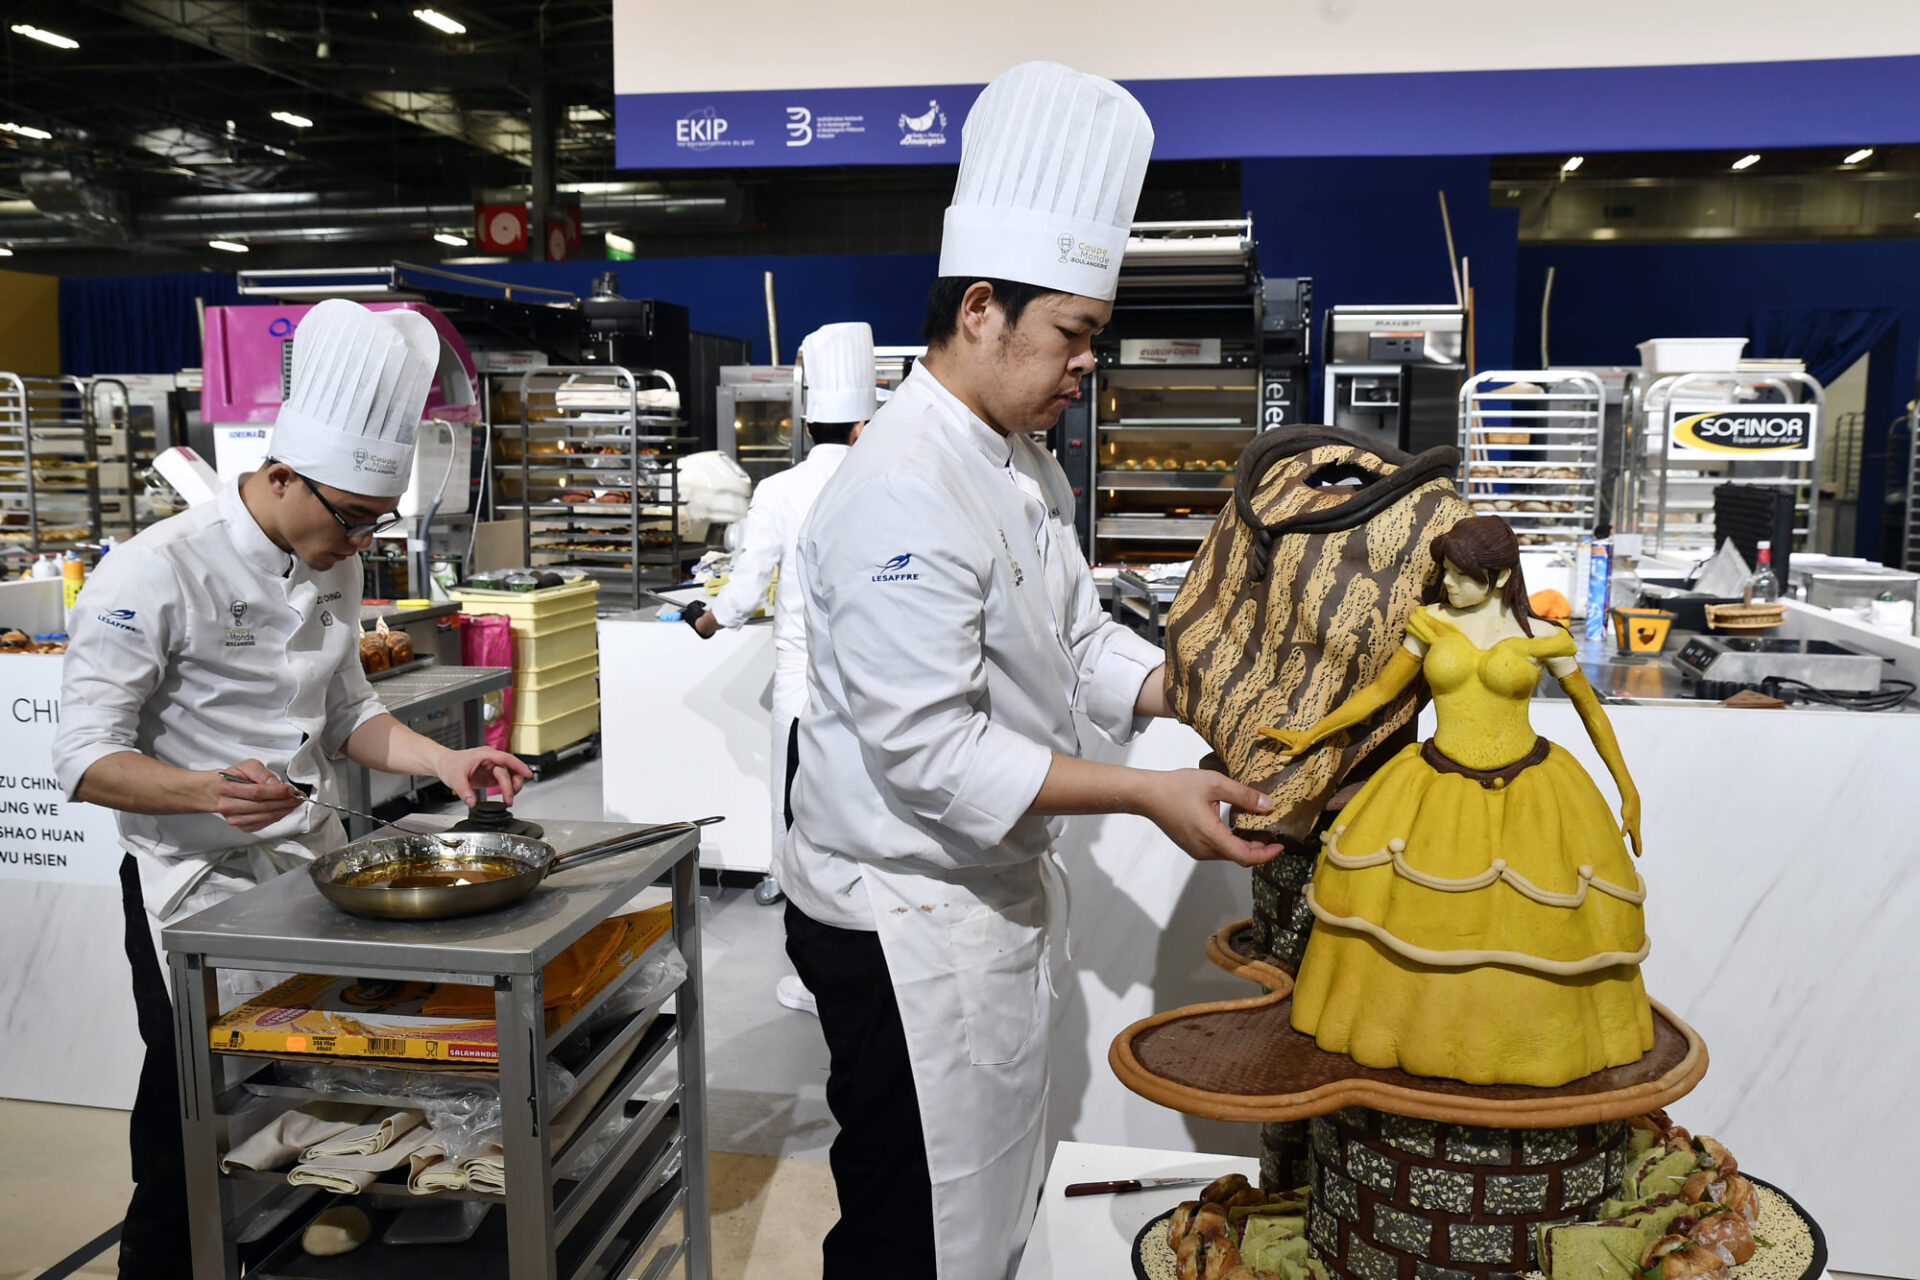 Team Taiwan working on the Beauty and the Beast product for the art category at the Sirha Europain